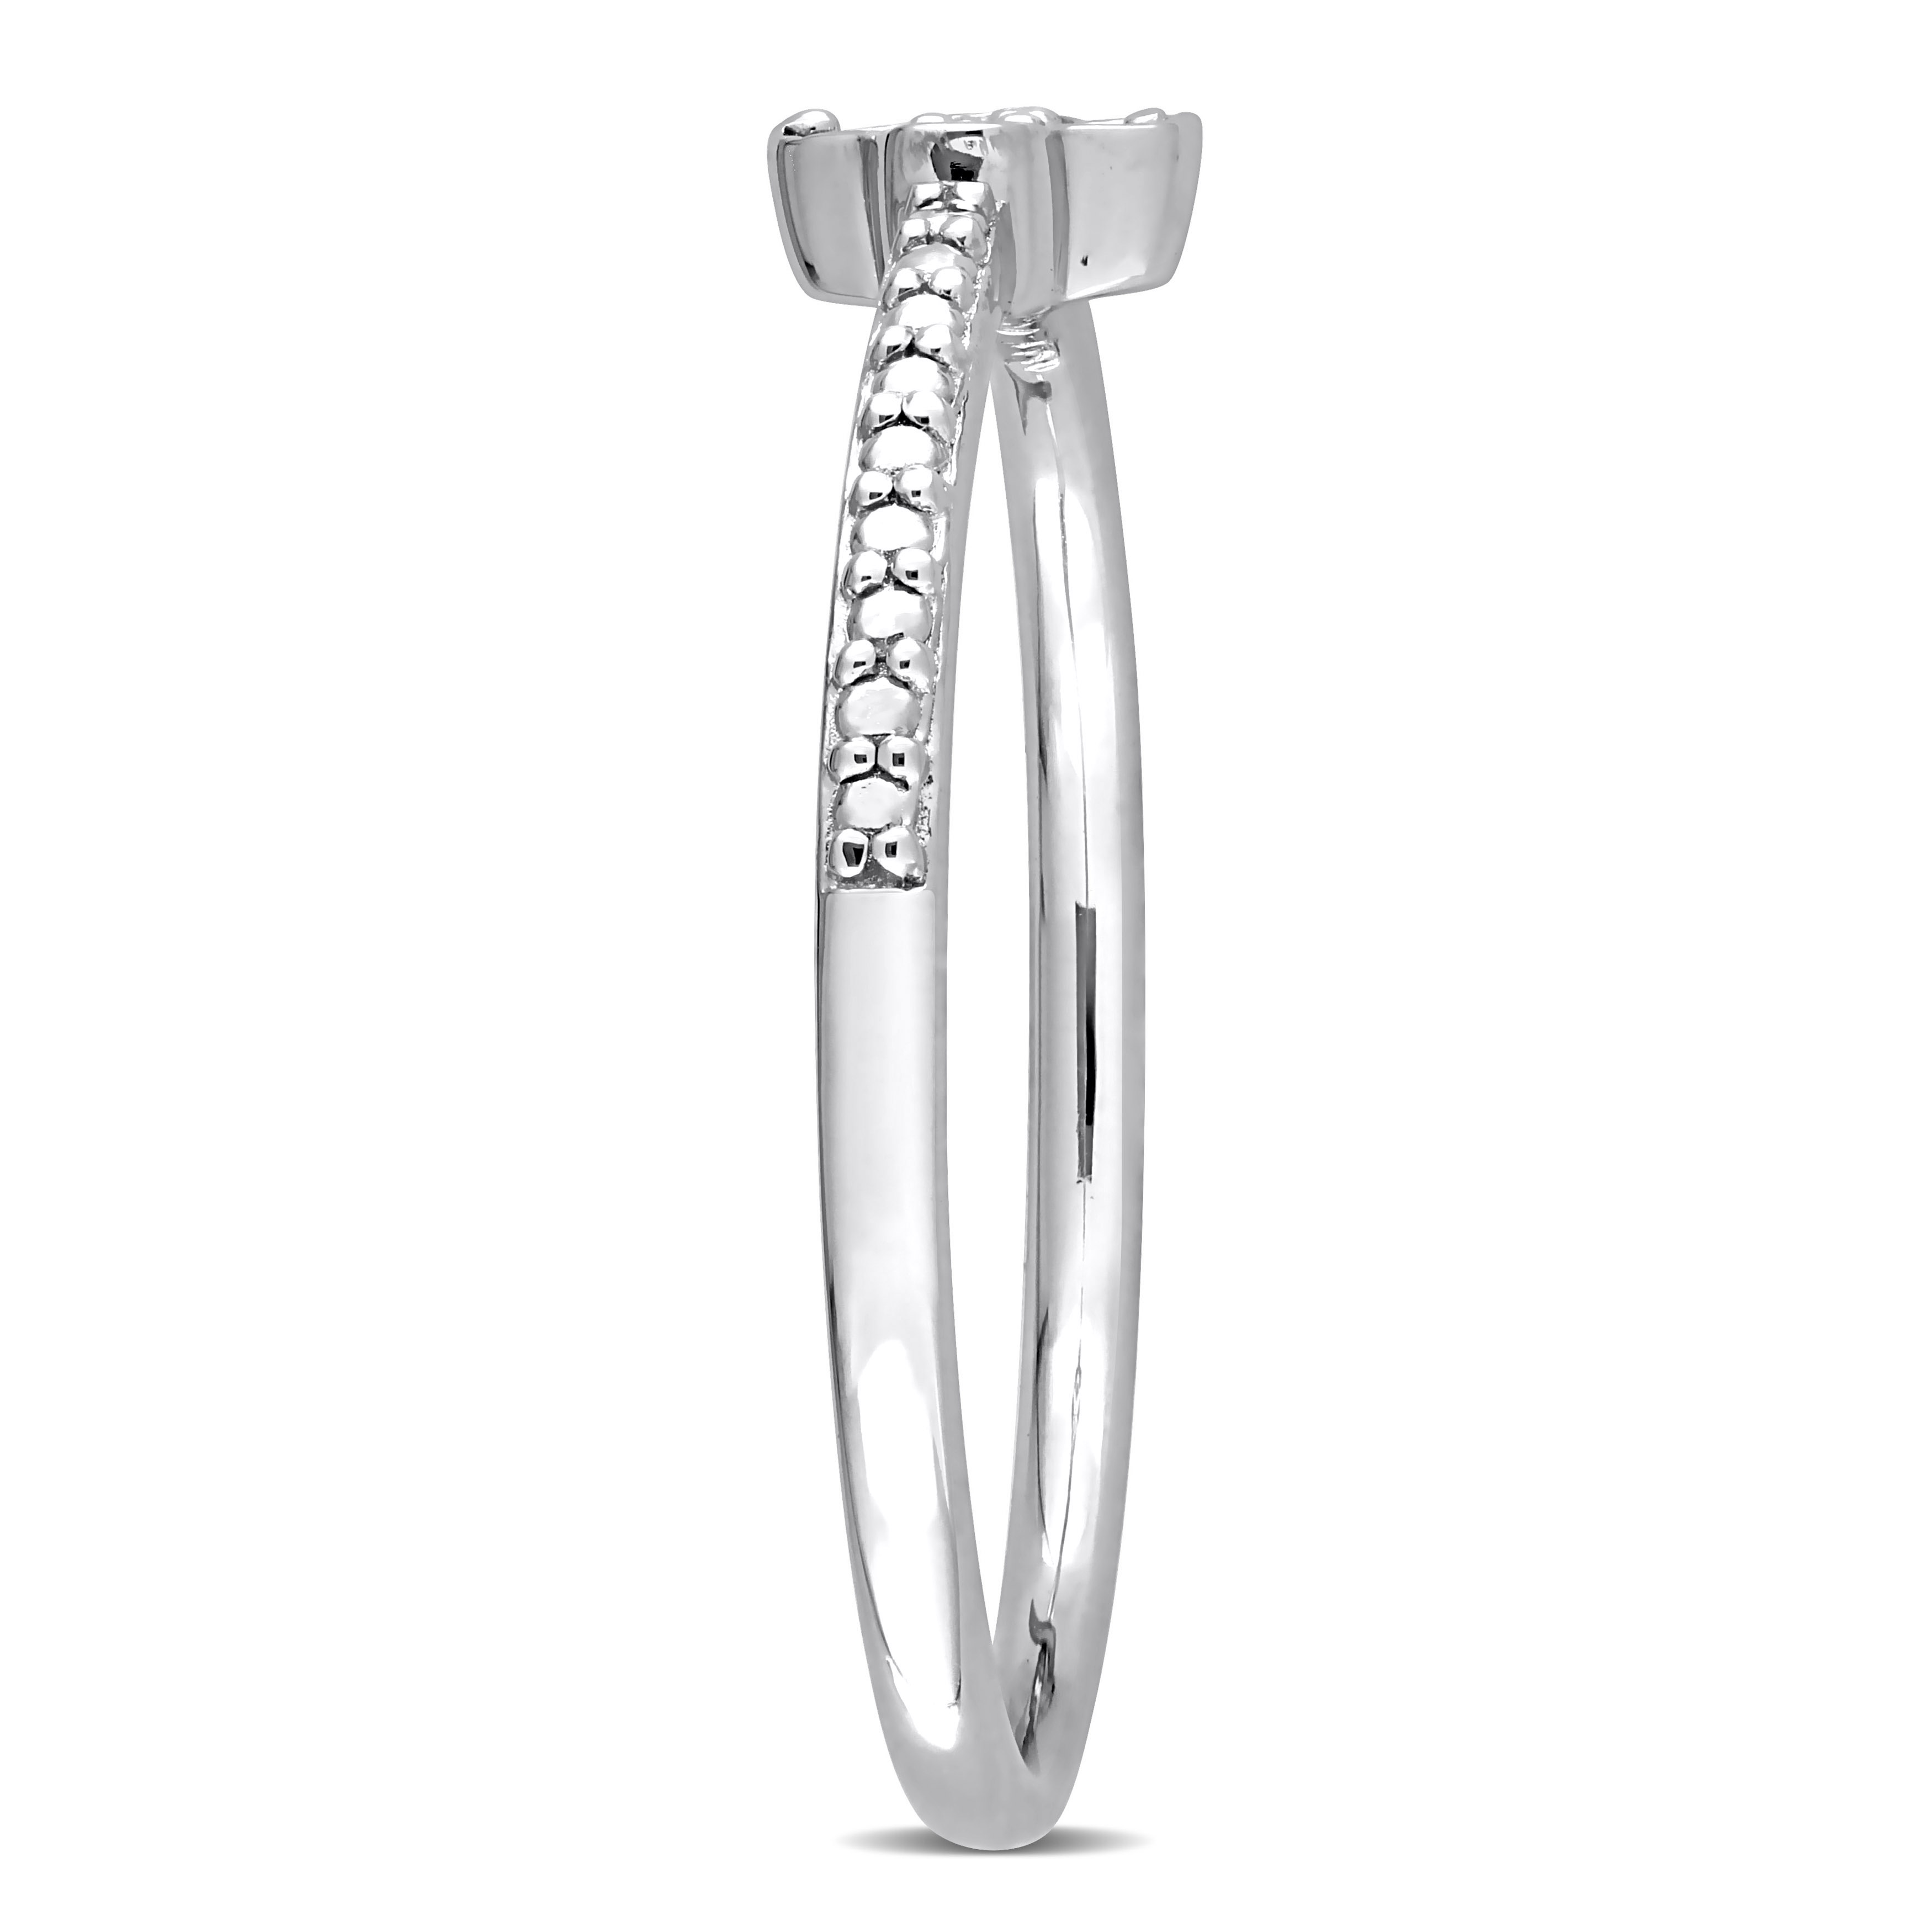 Diamond Accent Floral Promise Ring in Sterling Silver